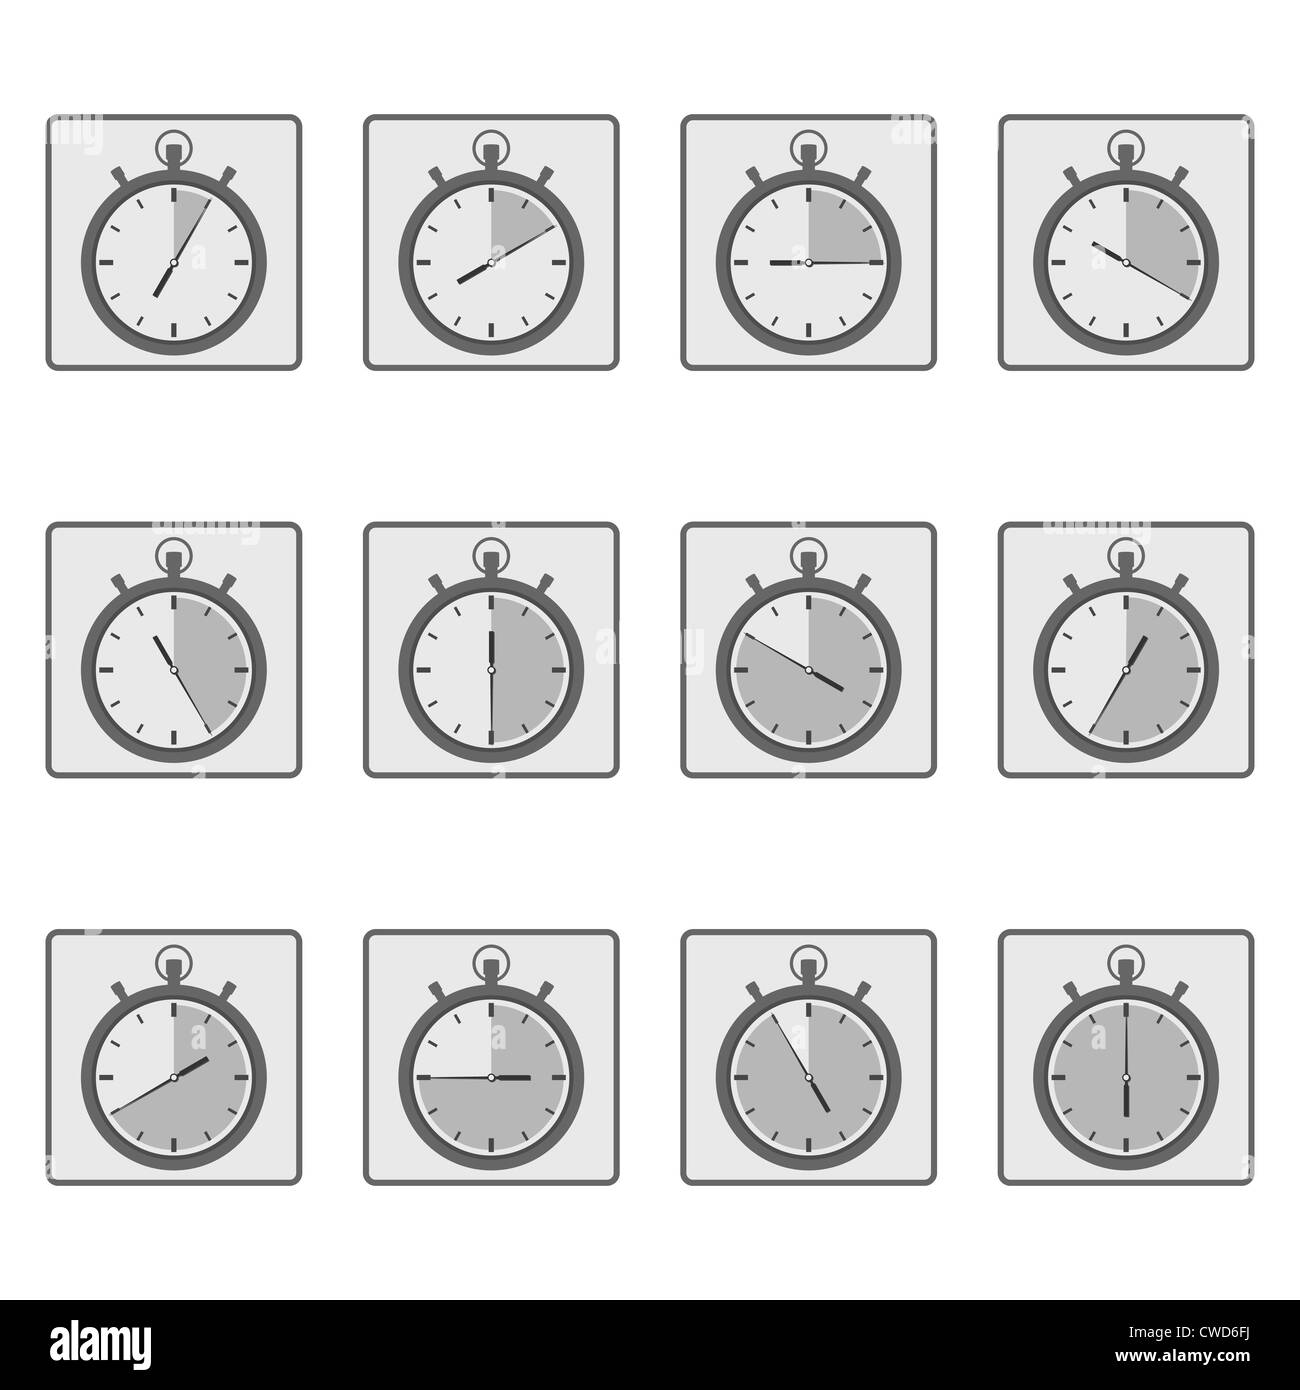 Set of simple icons of timers Stock Photo